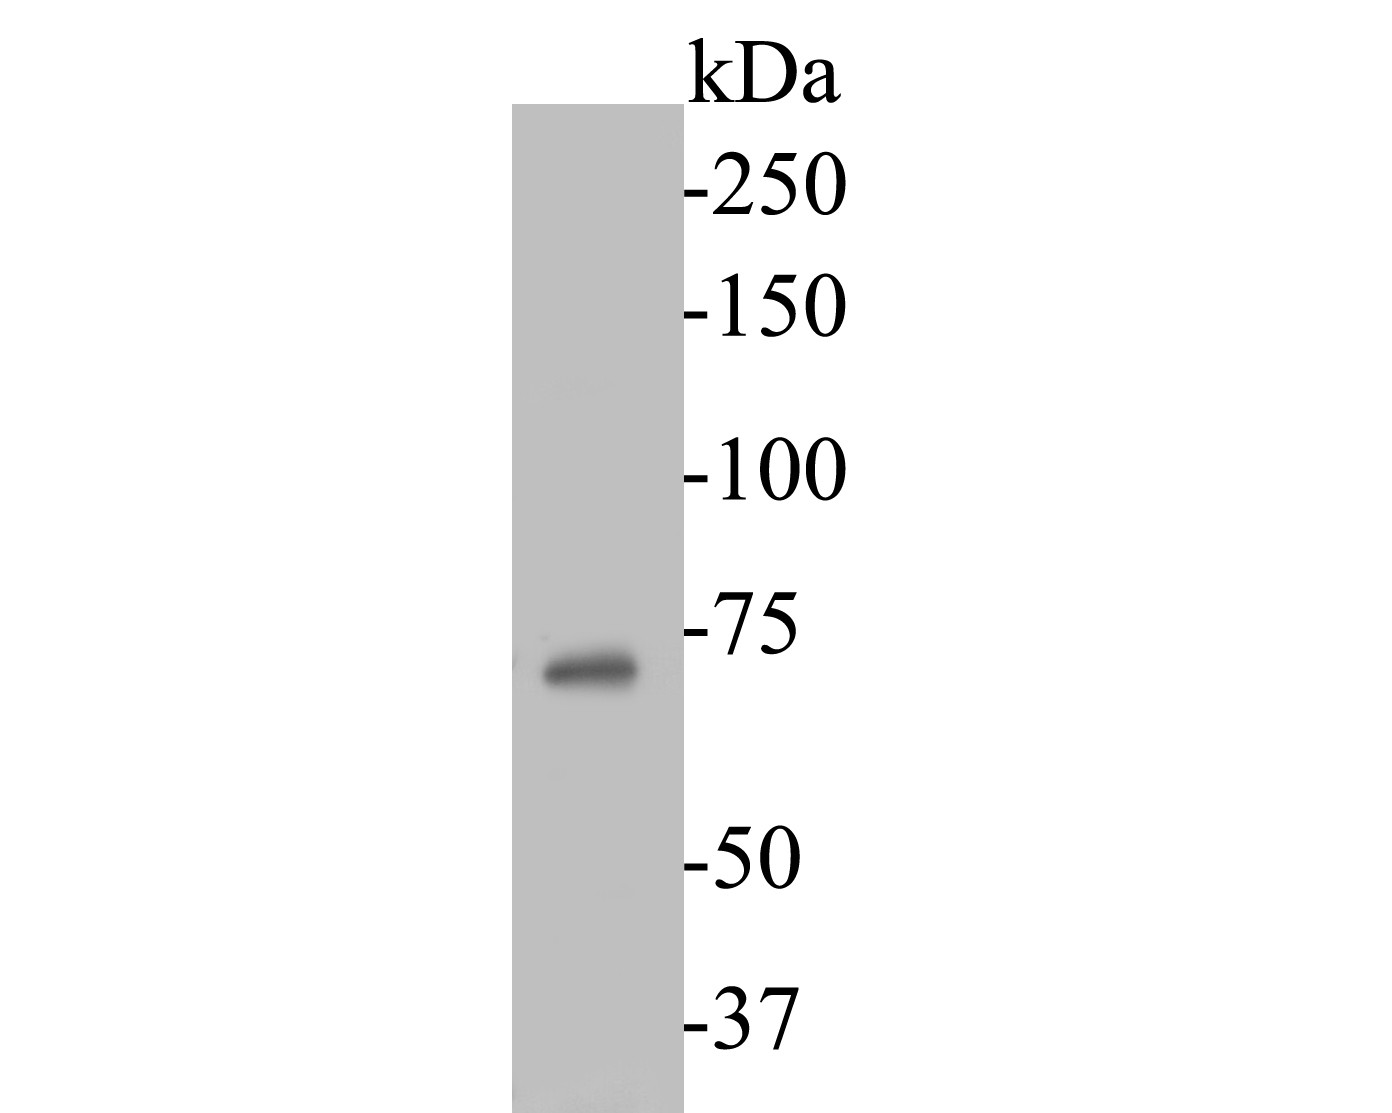 Western blot analysis of Dux on Raji cell lysates. Proteins were transferred to a PVDF membrane and blocked with 5% BSA in PBS for 1 hour at room temperature. The primary antibody (ER1901-52, 1/1000) was used in 5% BSA at room temperature for 2 hours. Goat Anti-Rabbit IgG - HRP Secondary Antibody (HA1001) at 1:5,000 dilution was used for 1 hour at room temperature.